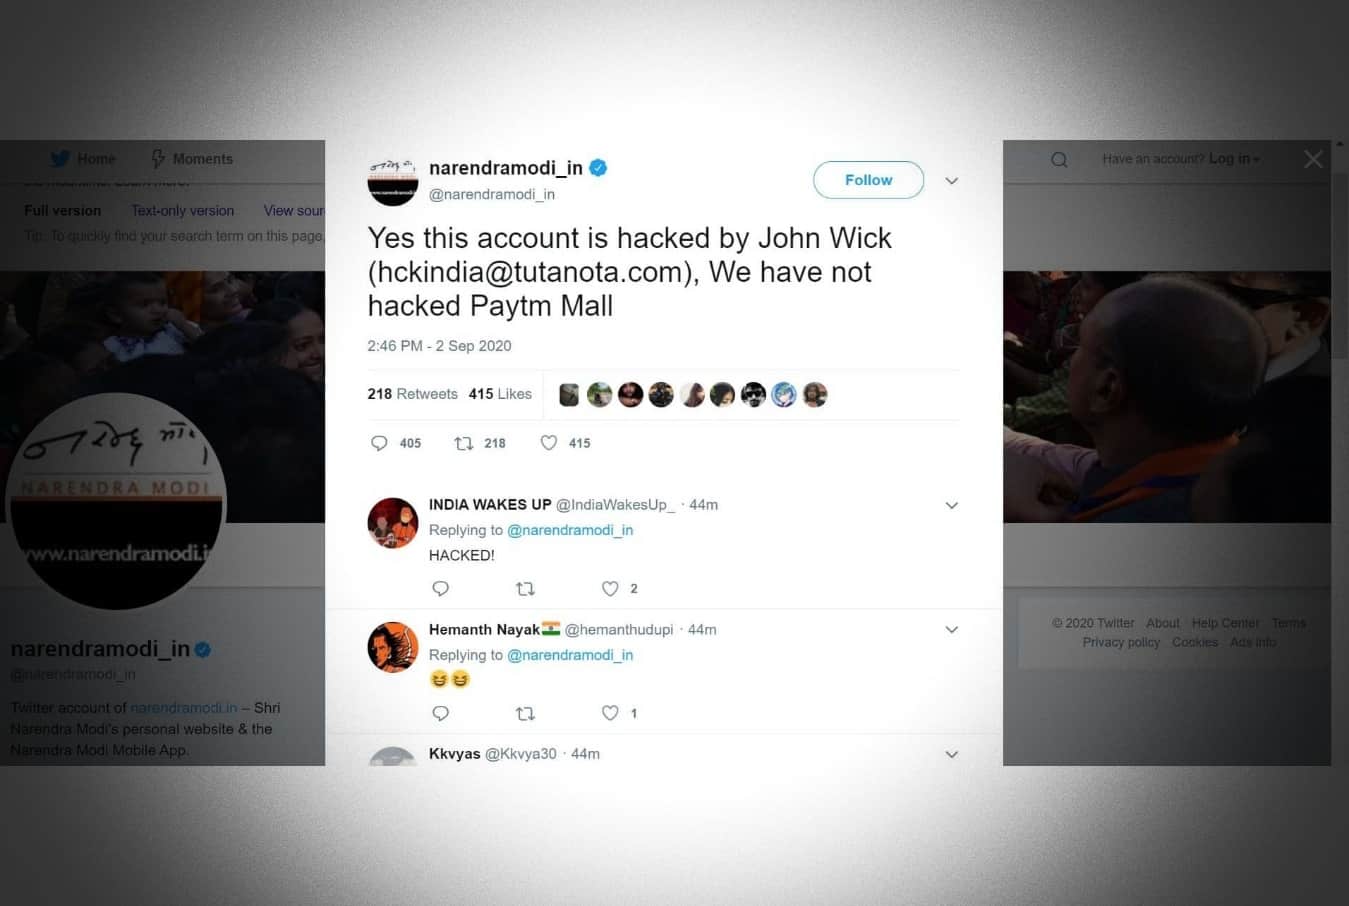 Indian PM Modi’s Twitter handle hacked to ask for Bitcoin donations